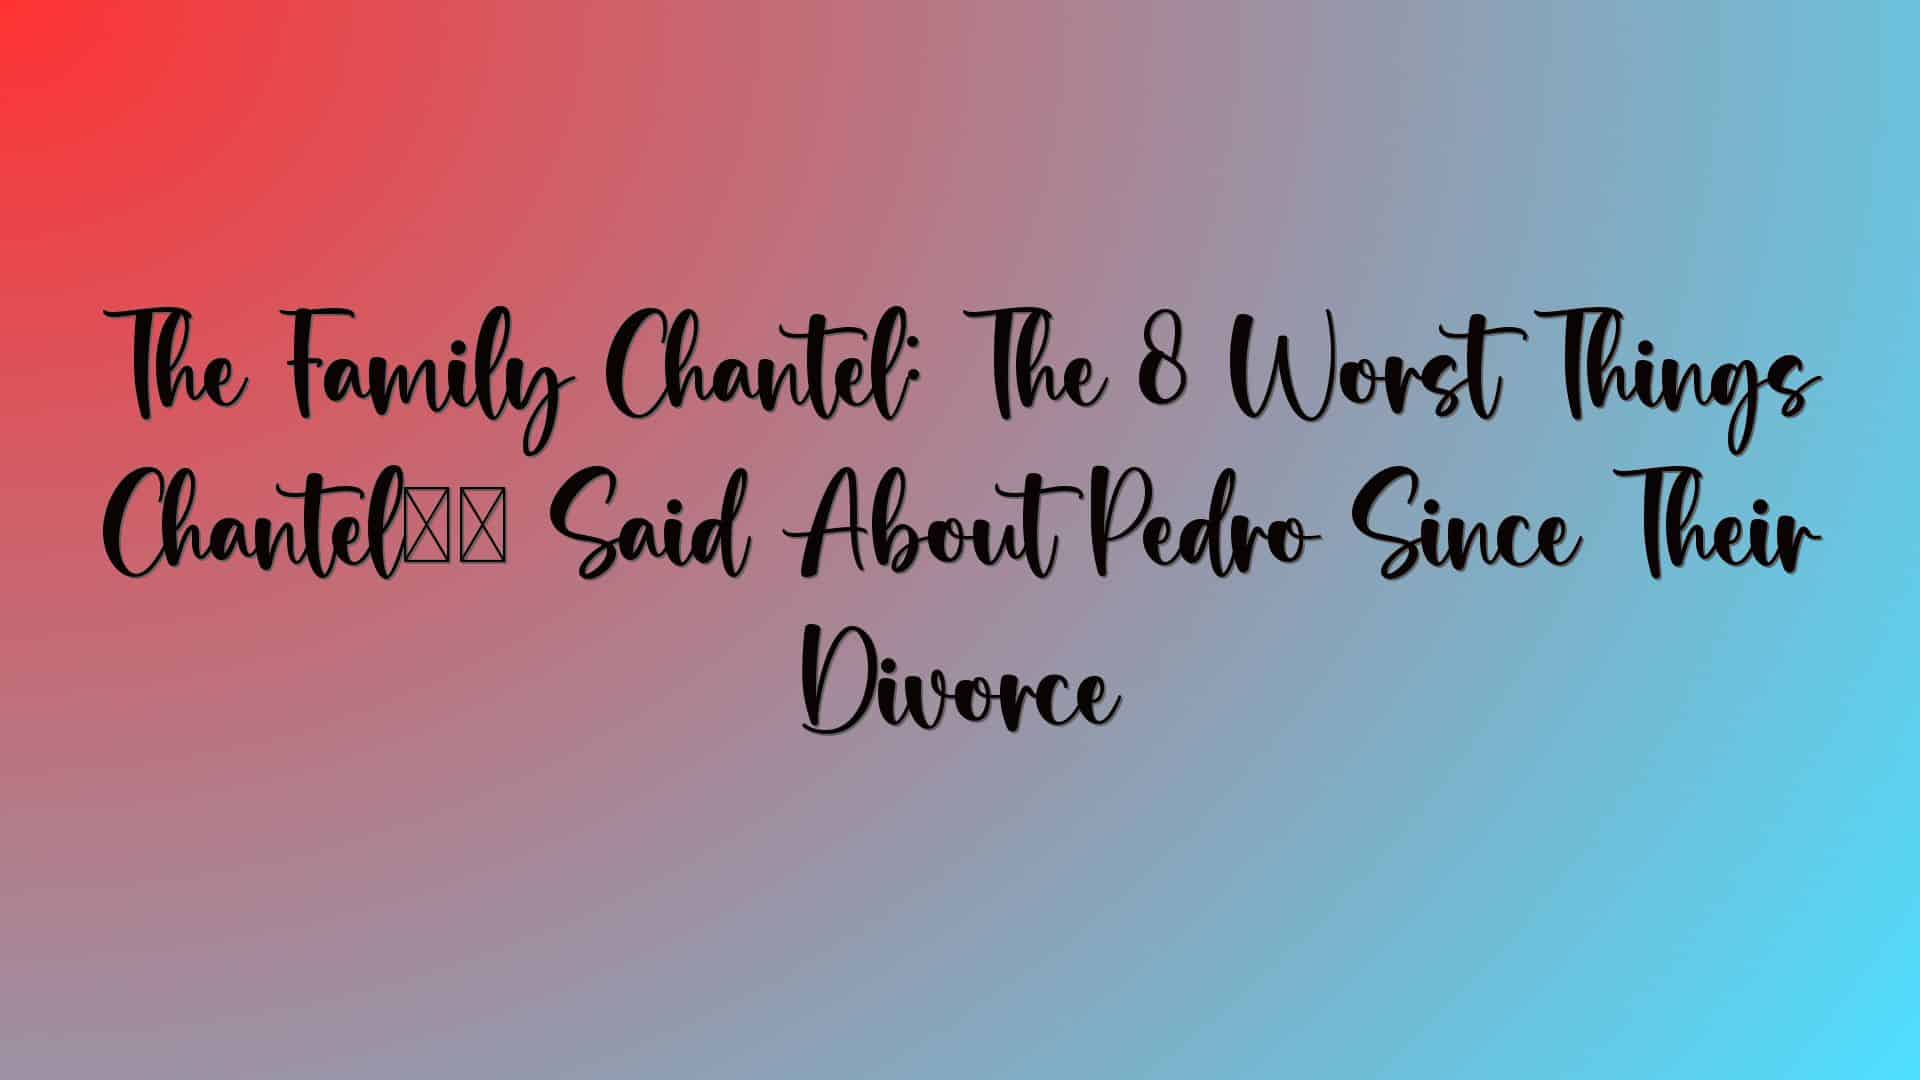 The Family Chantel: The 8 Worst Things Chantel’s Said About Pedro Since Their Divorce